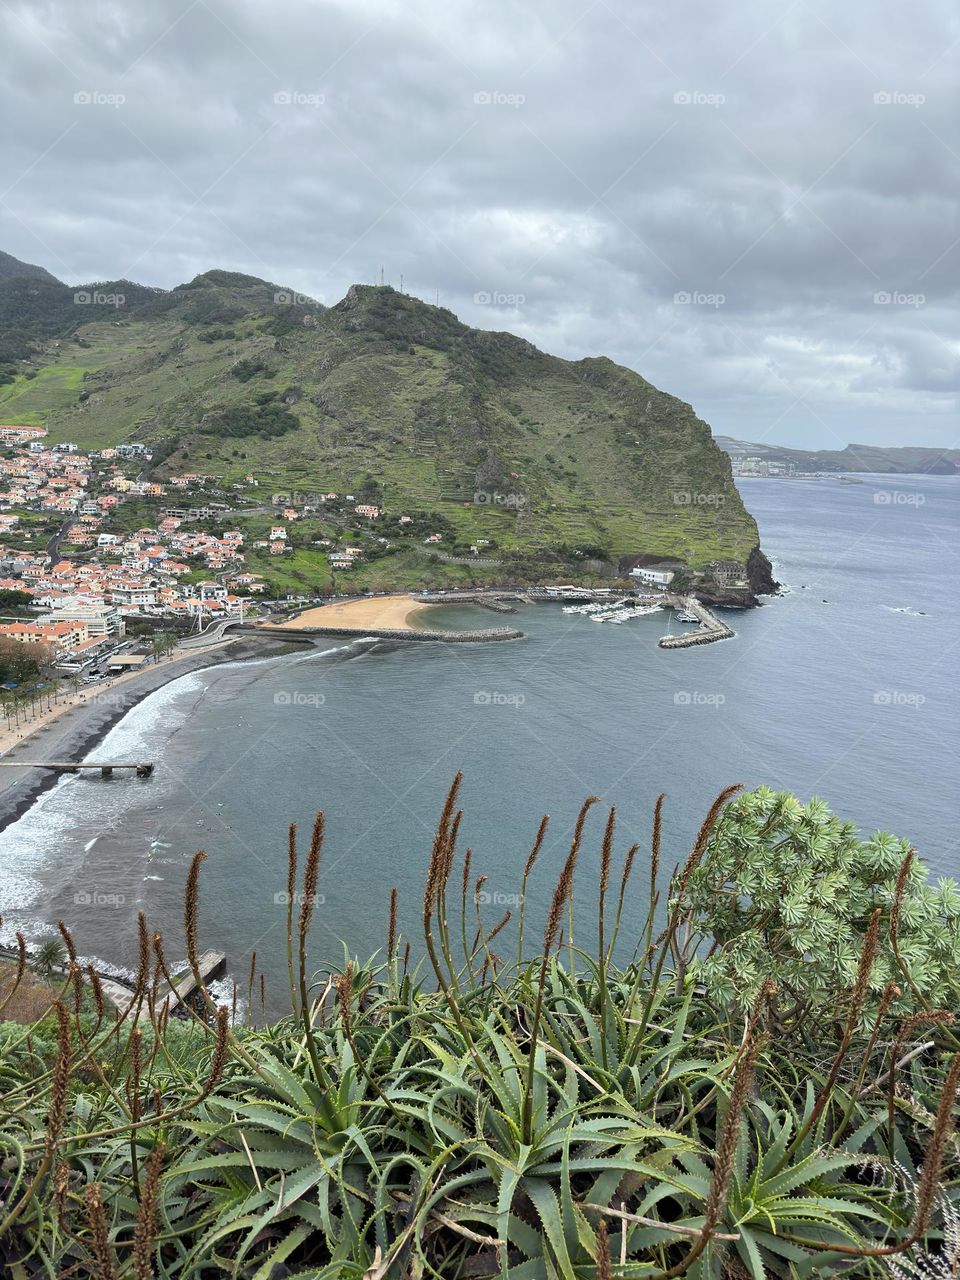 Looking down on the ocean and green cliffs surrounding the small island town of Machico